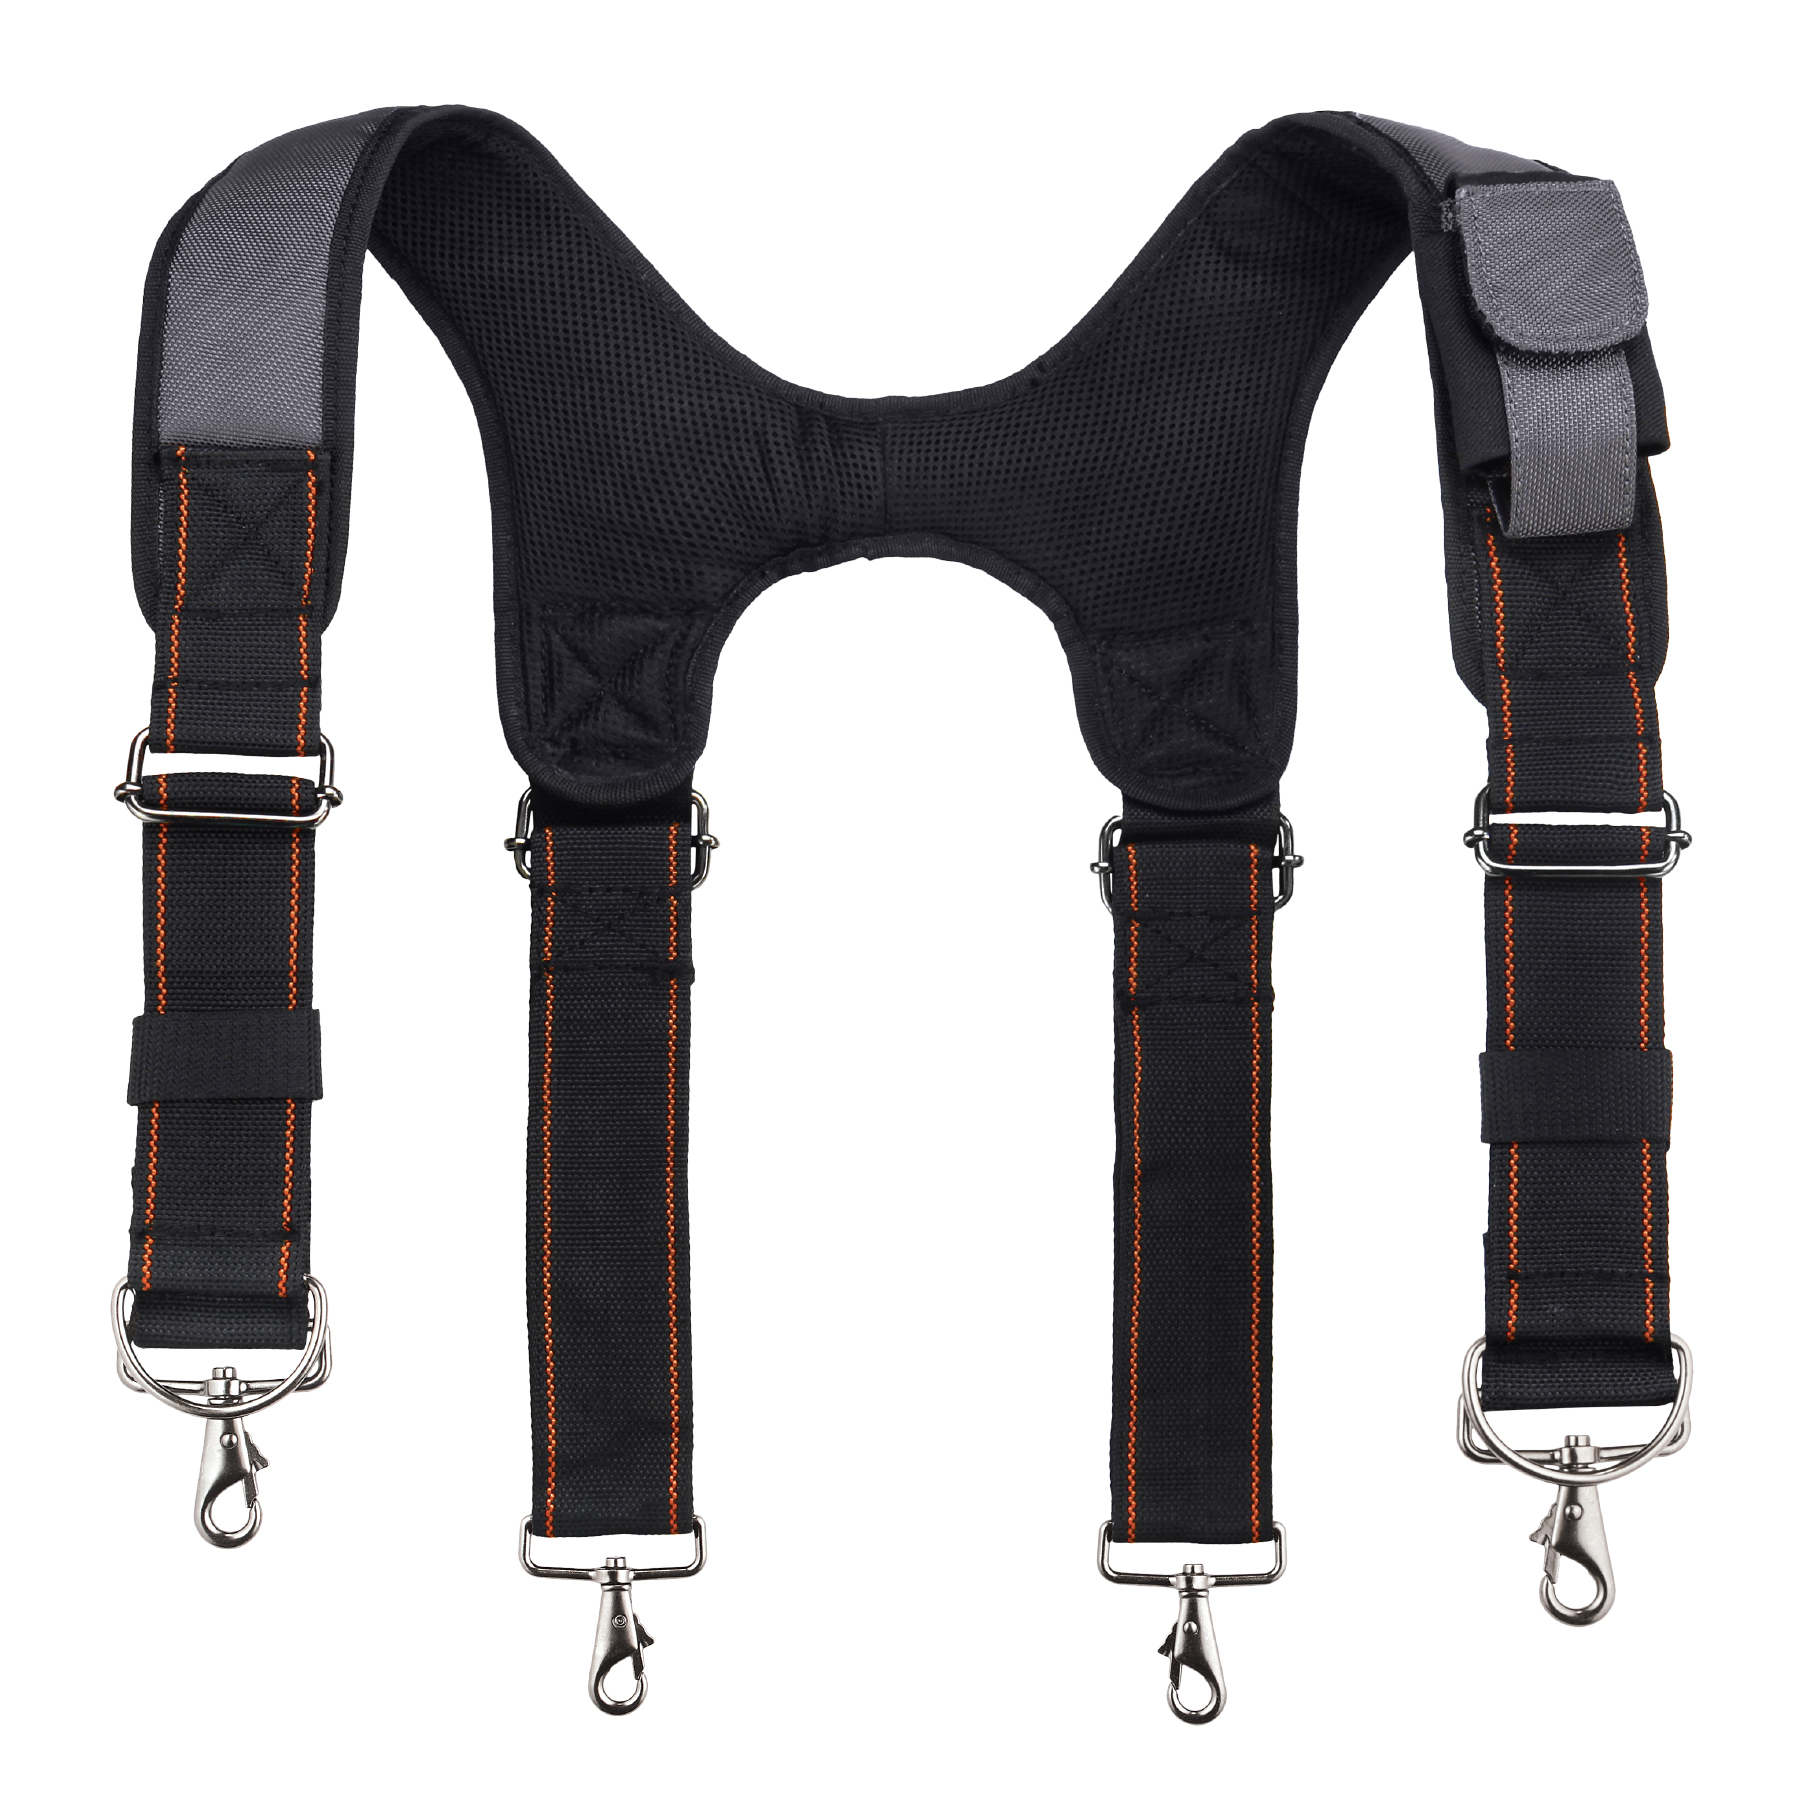 Black Padded Tool Belt Suspenders Gives More Support Mens 1 Size Fits Most 